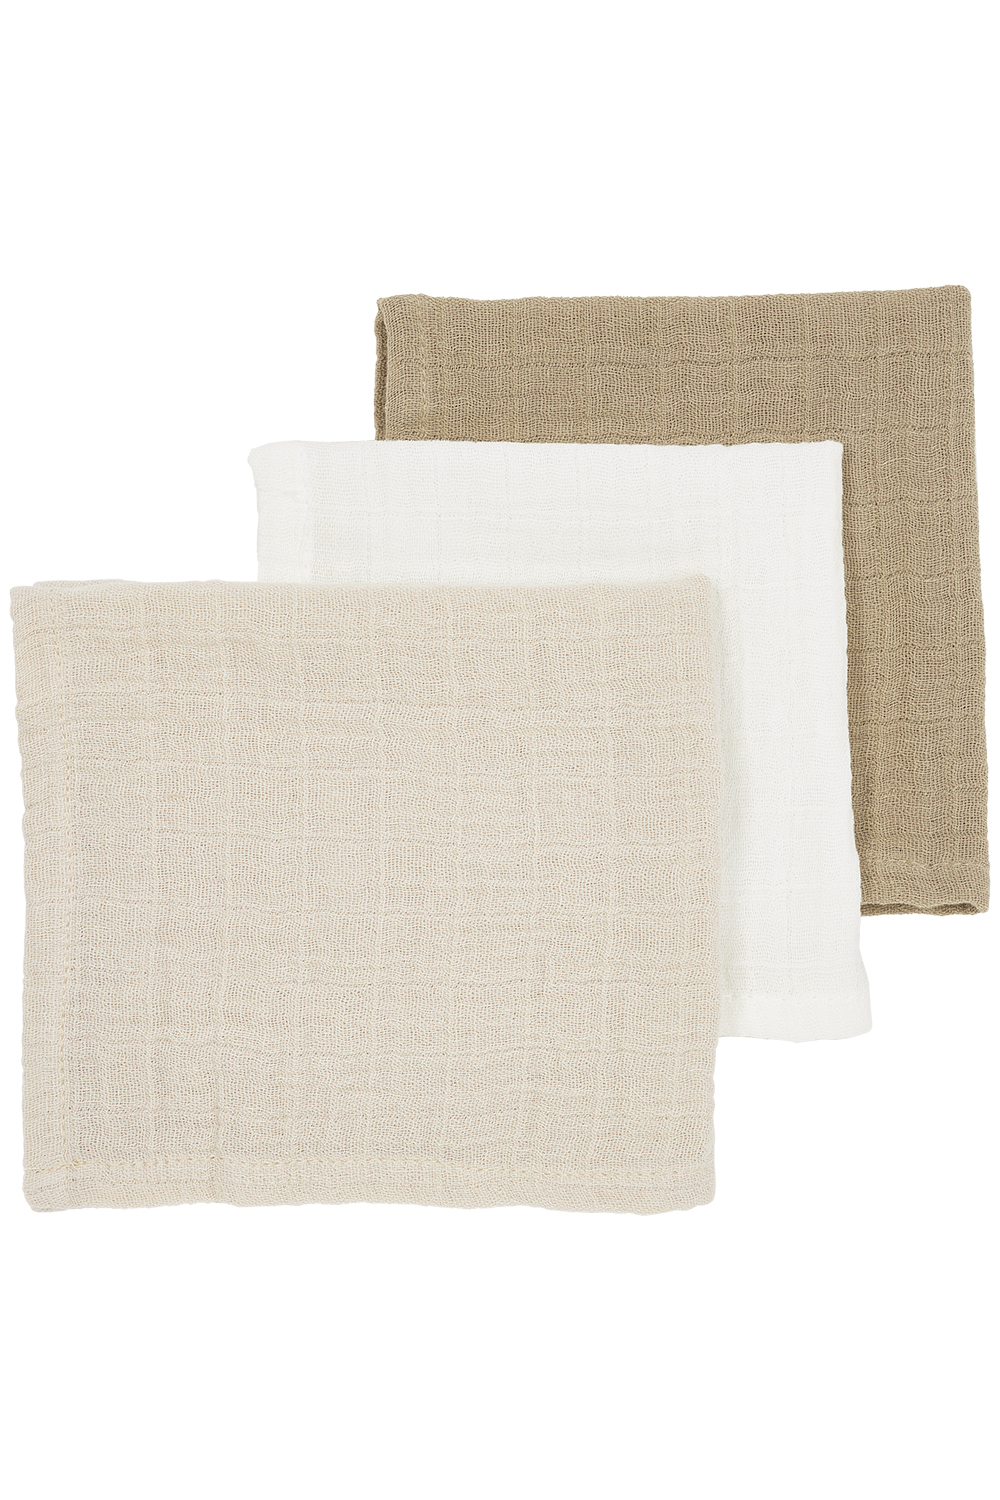 Spucktücher 3er pack pre-washed musselin Uni - offwhite/soft sand/taupe - 30x30cm